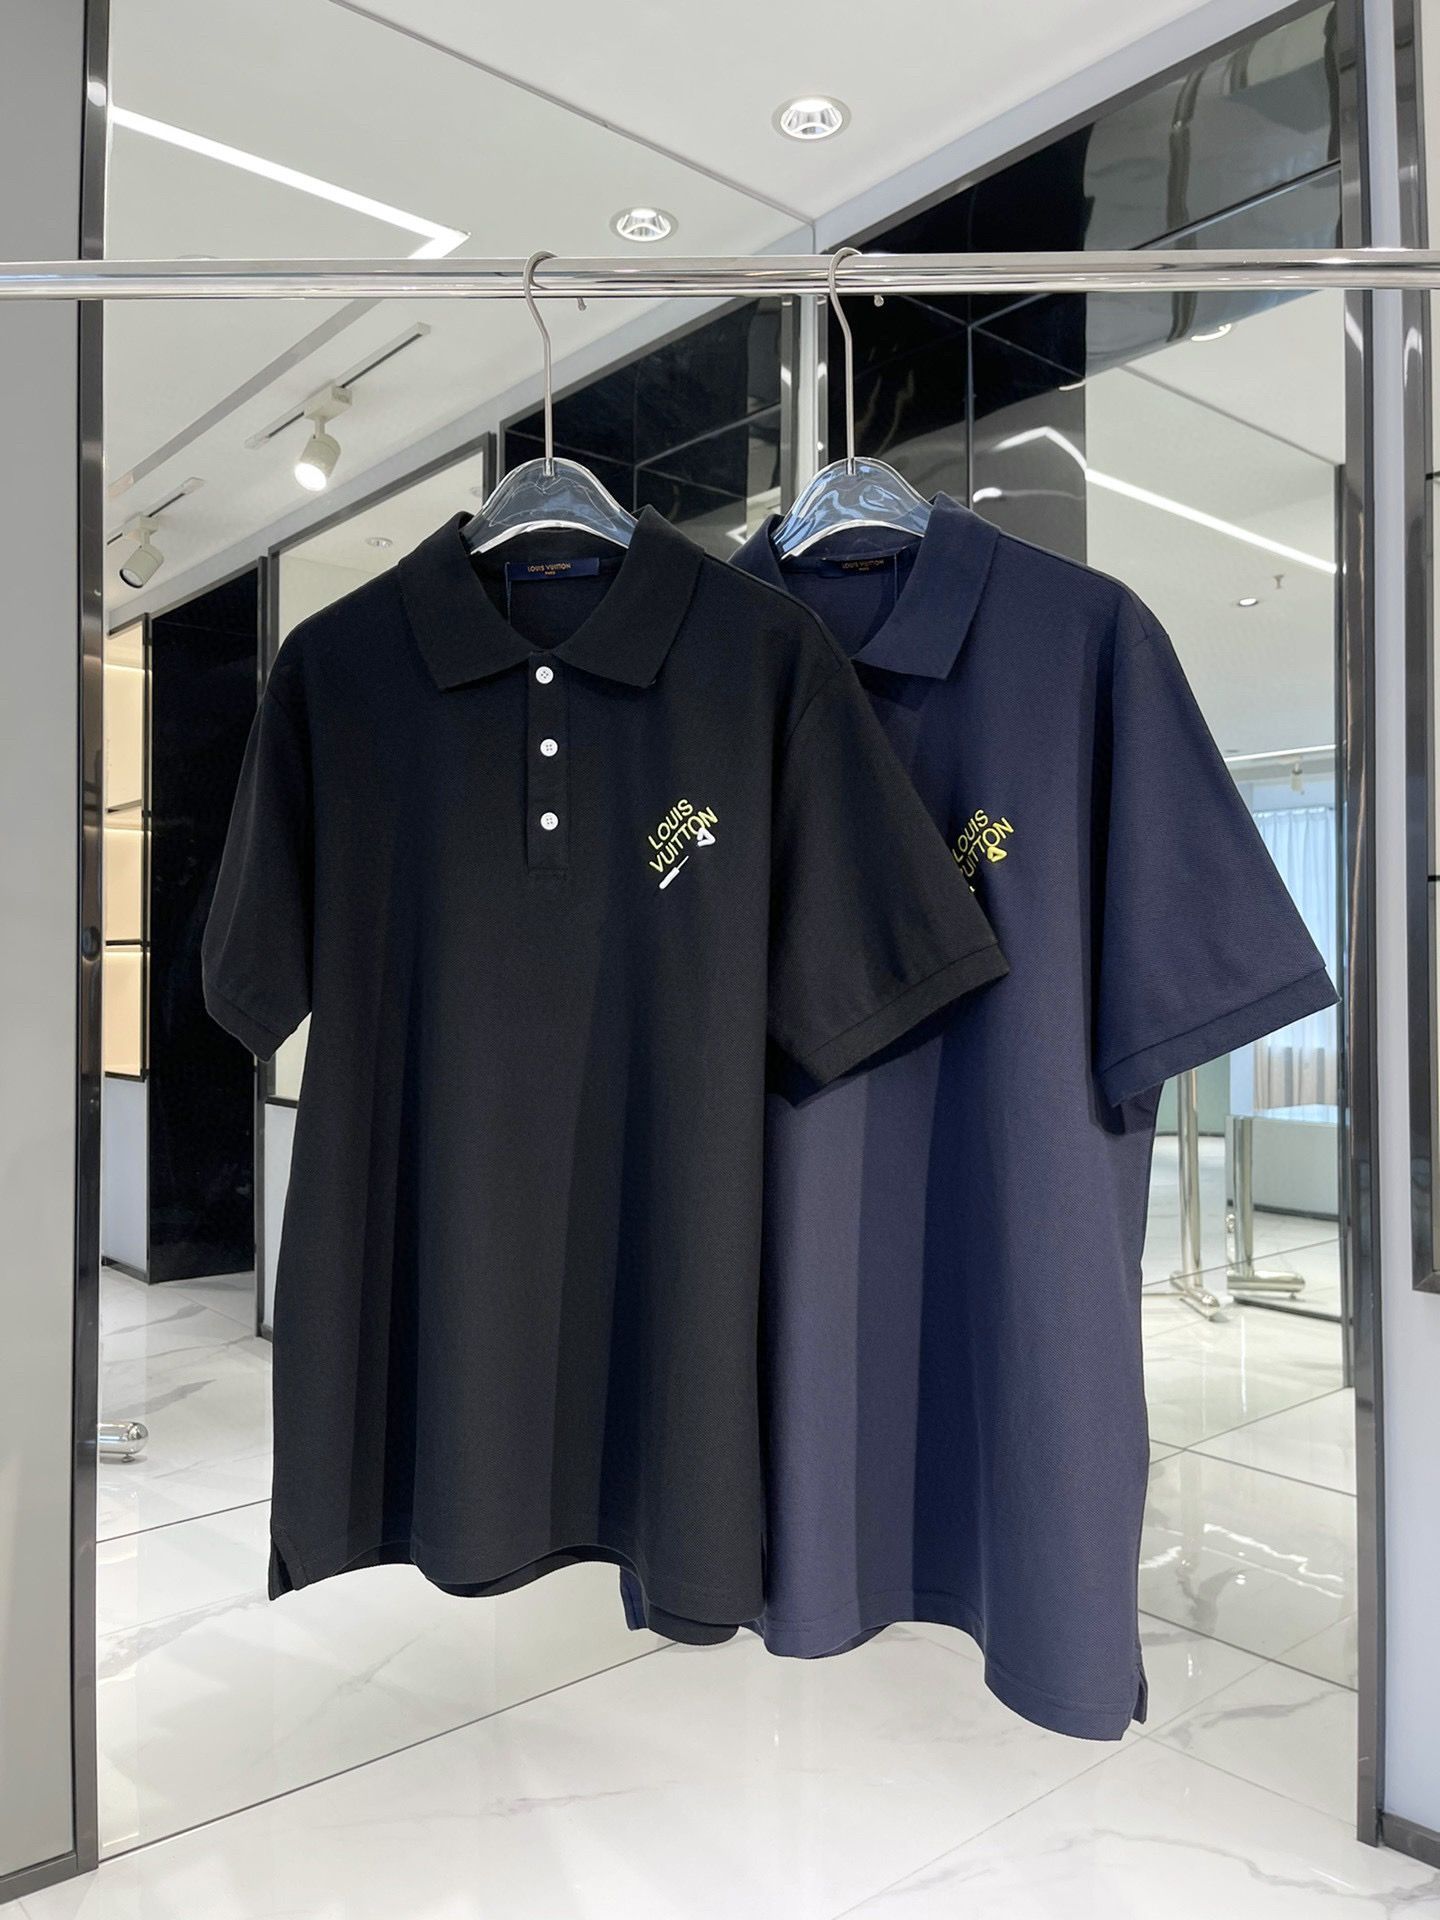 Authentic lV pin embroidered short sleeve polo shirt